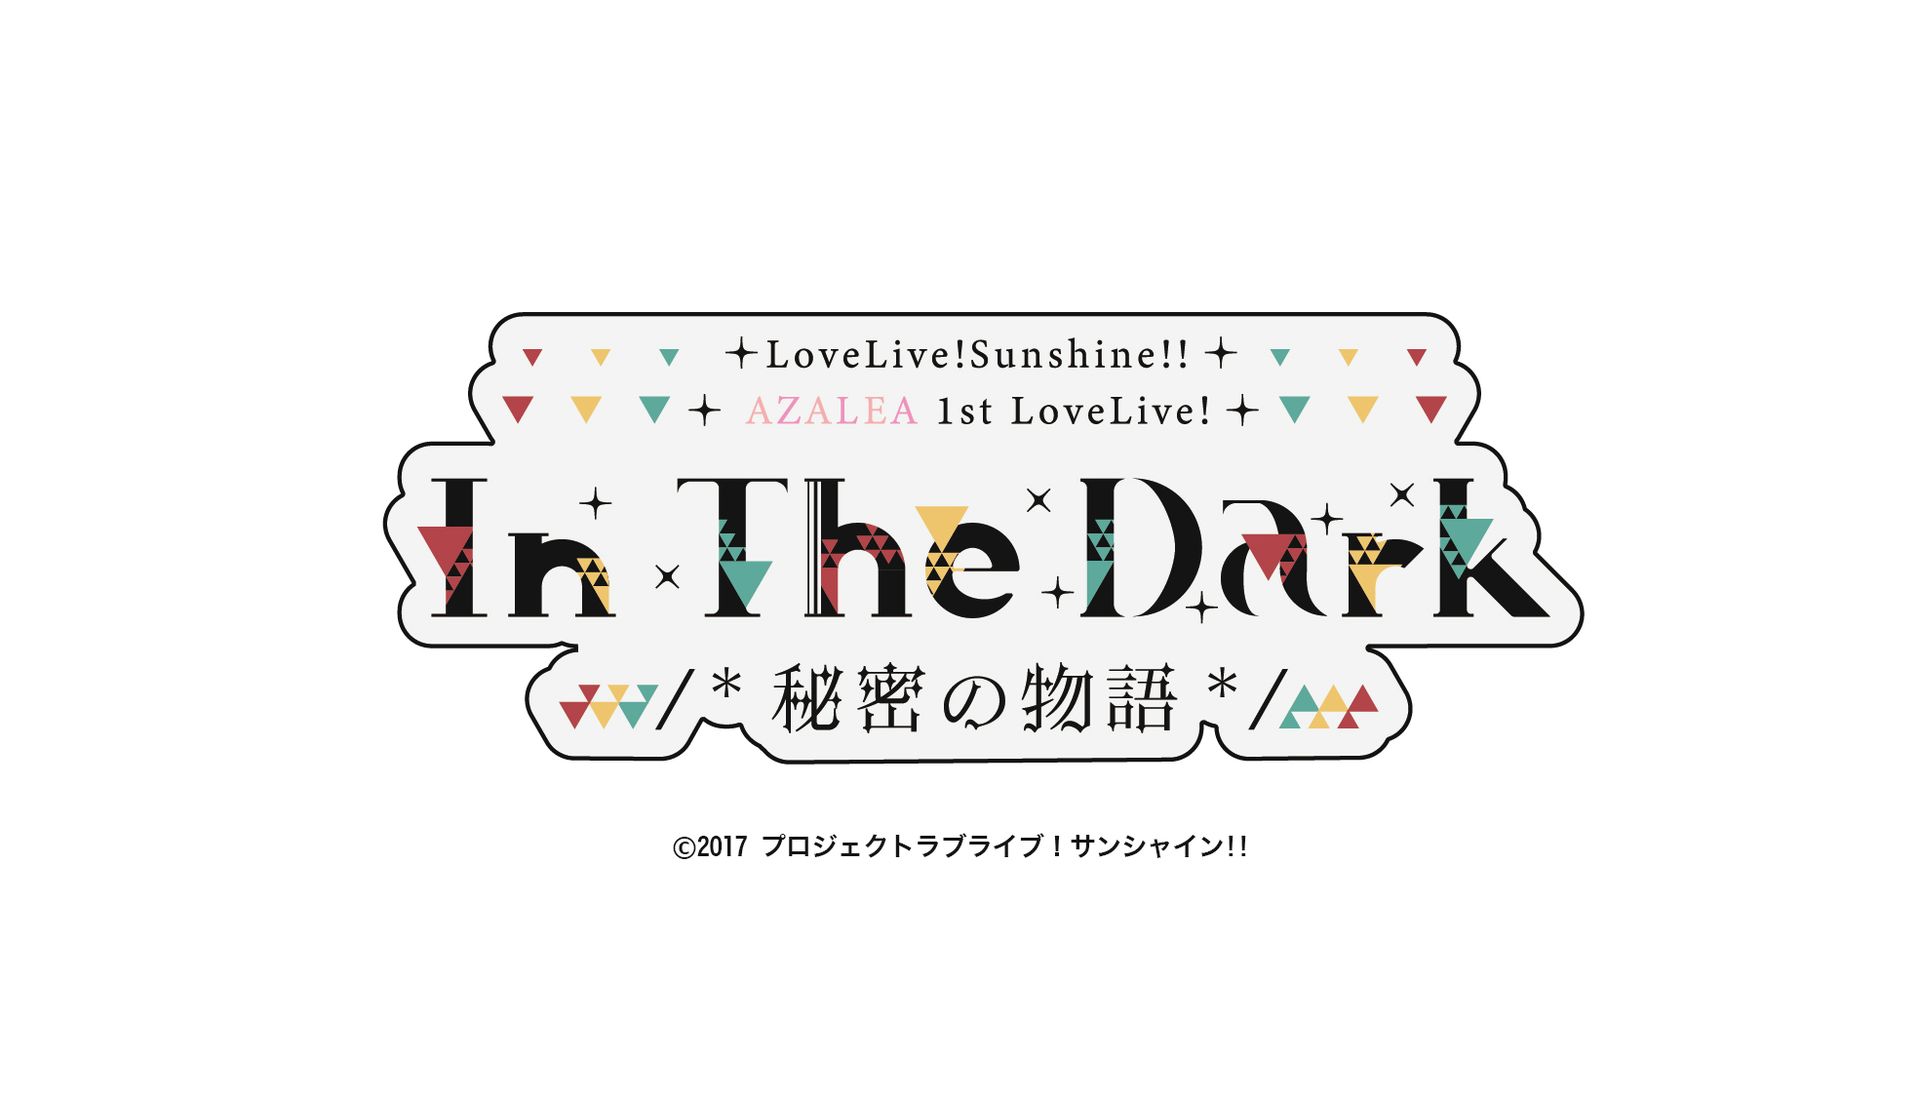 [Streaming+] Love Live! Sunshine!! AZALEA 1st LoveLive! ~In The Dark /*Himitsu no Story*/~Day.2 【with audio commentary by AZALEA】 [Go To Event]